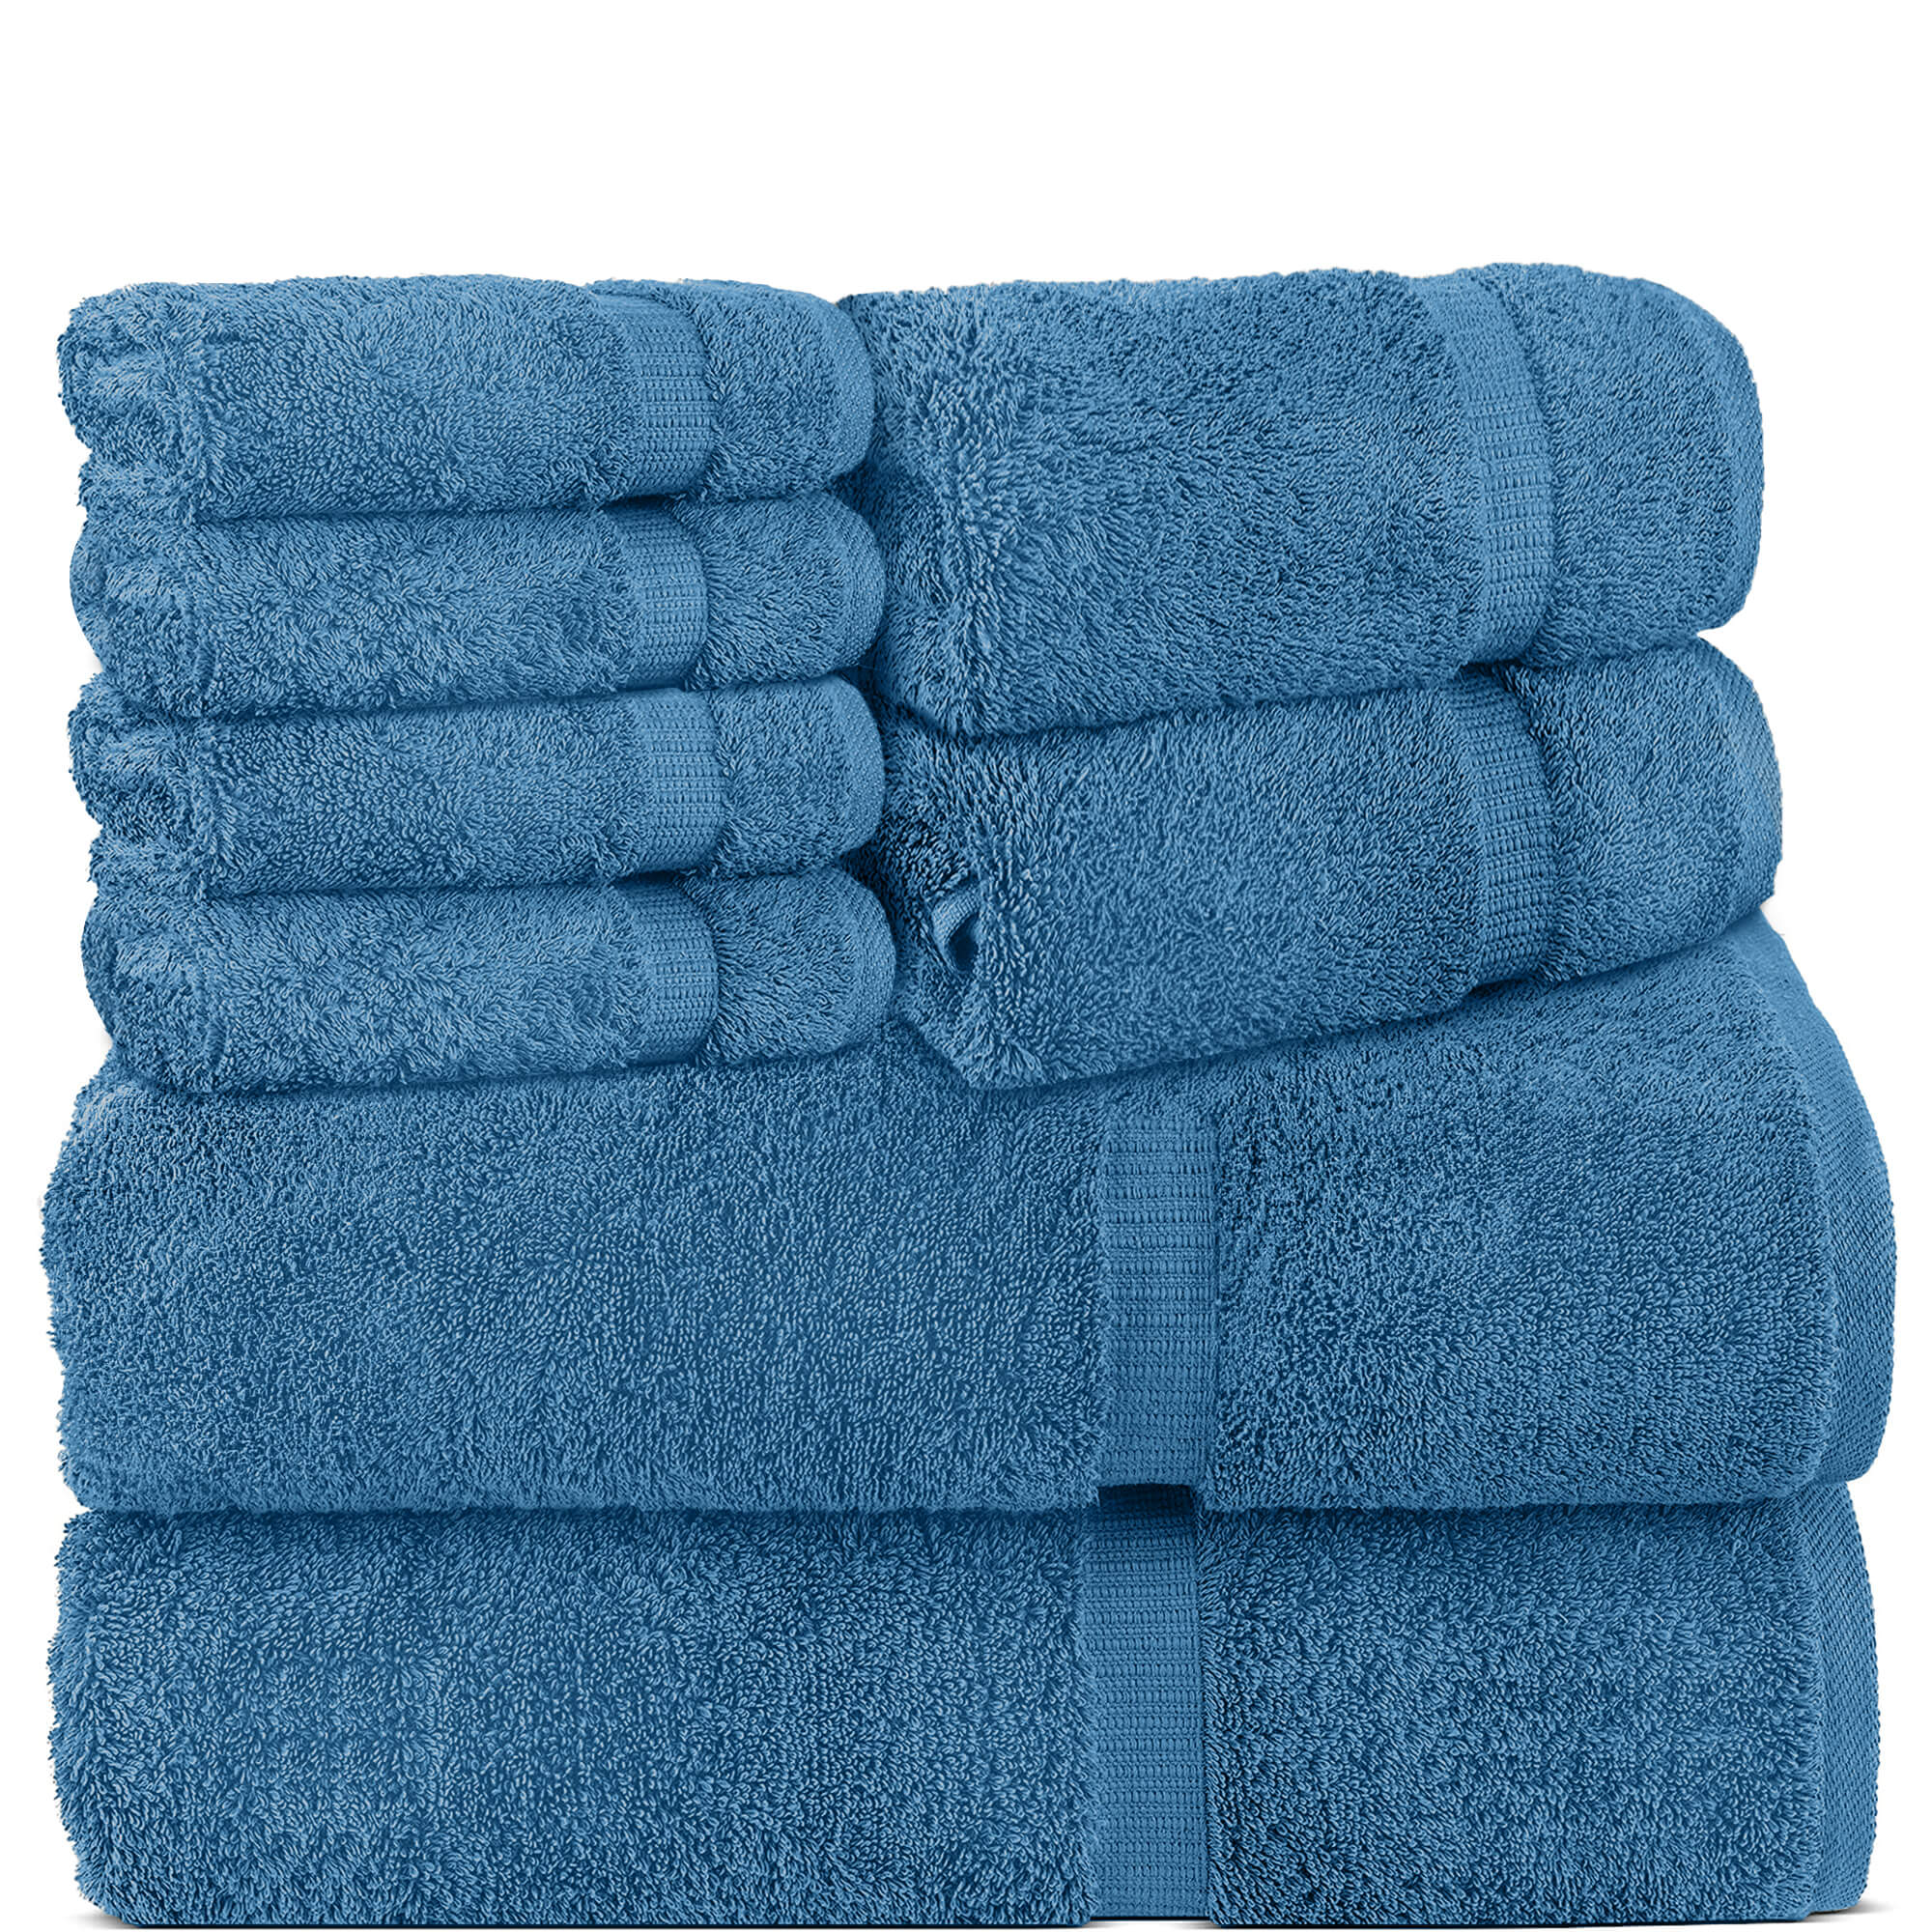 100% Cotton Quick Dry and Luxury Cherry Red Bath Towels (Pack of 4)